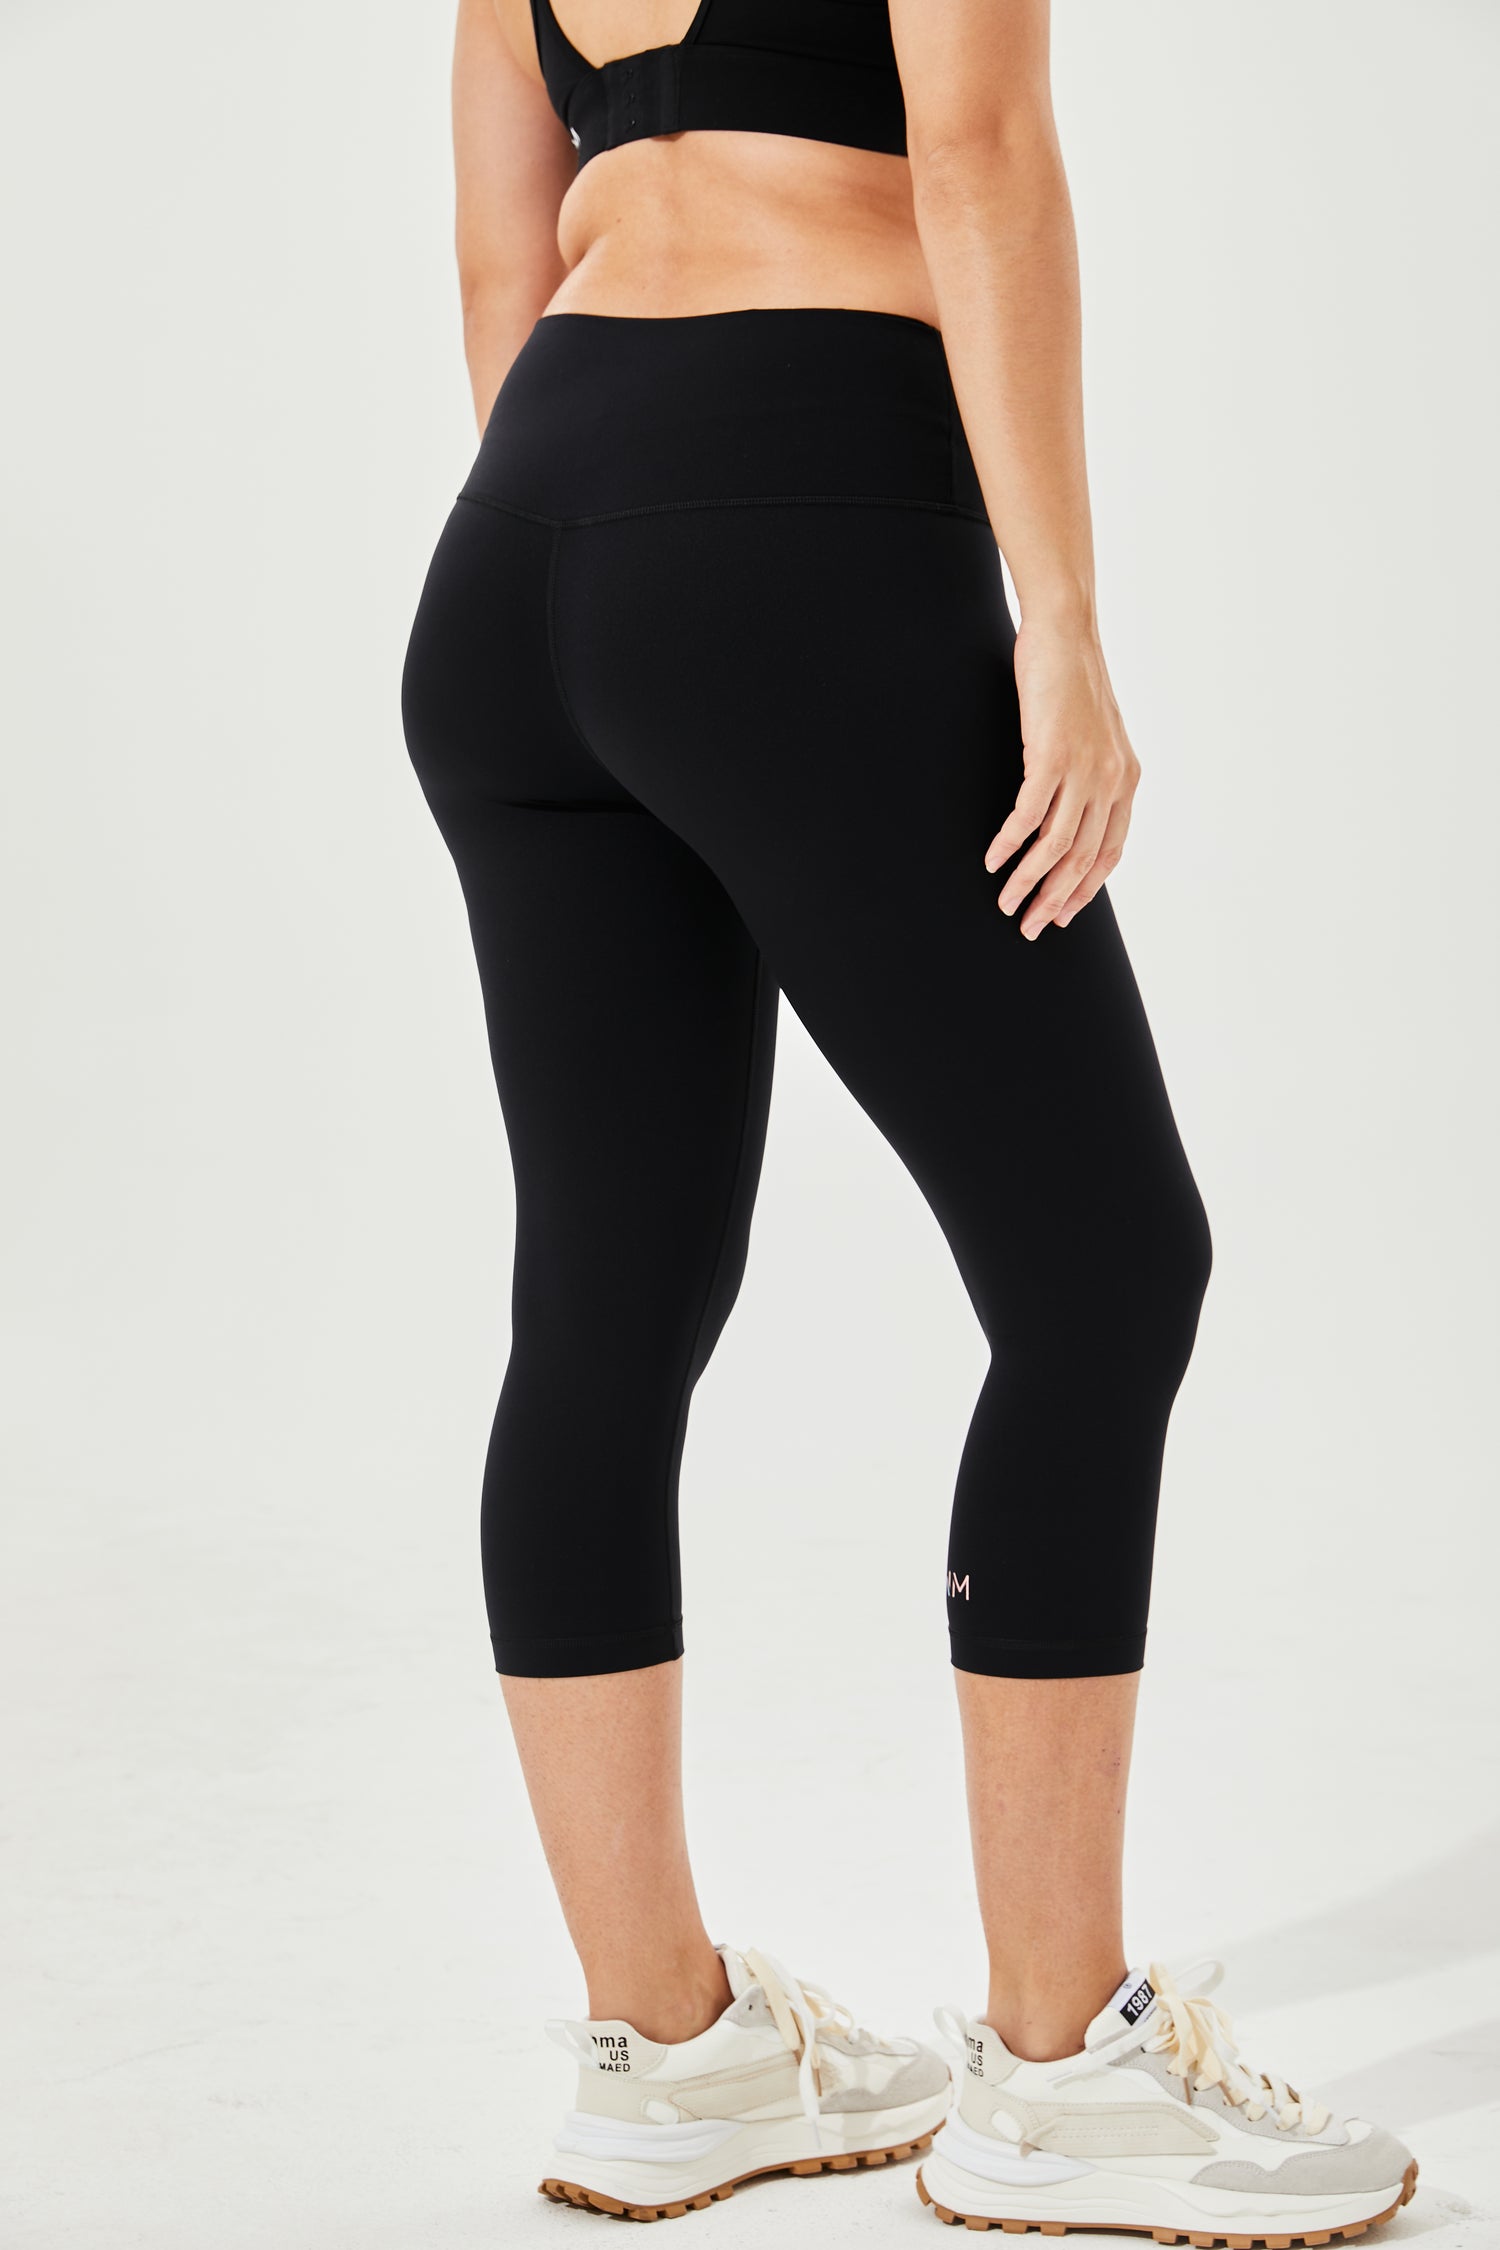 Buttery Soft High Waisted Capri Leggings for Women - Tummy Control, No See  Through, Workout Yoga Pants